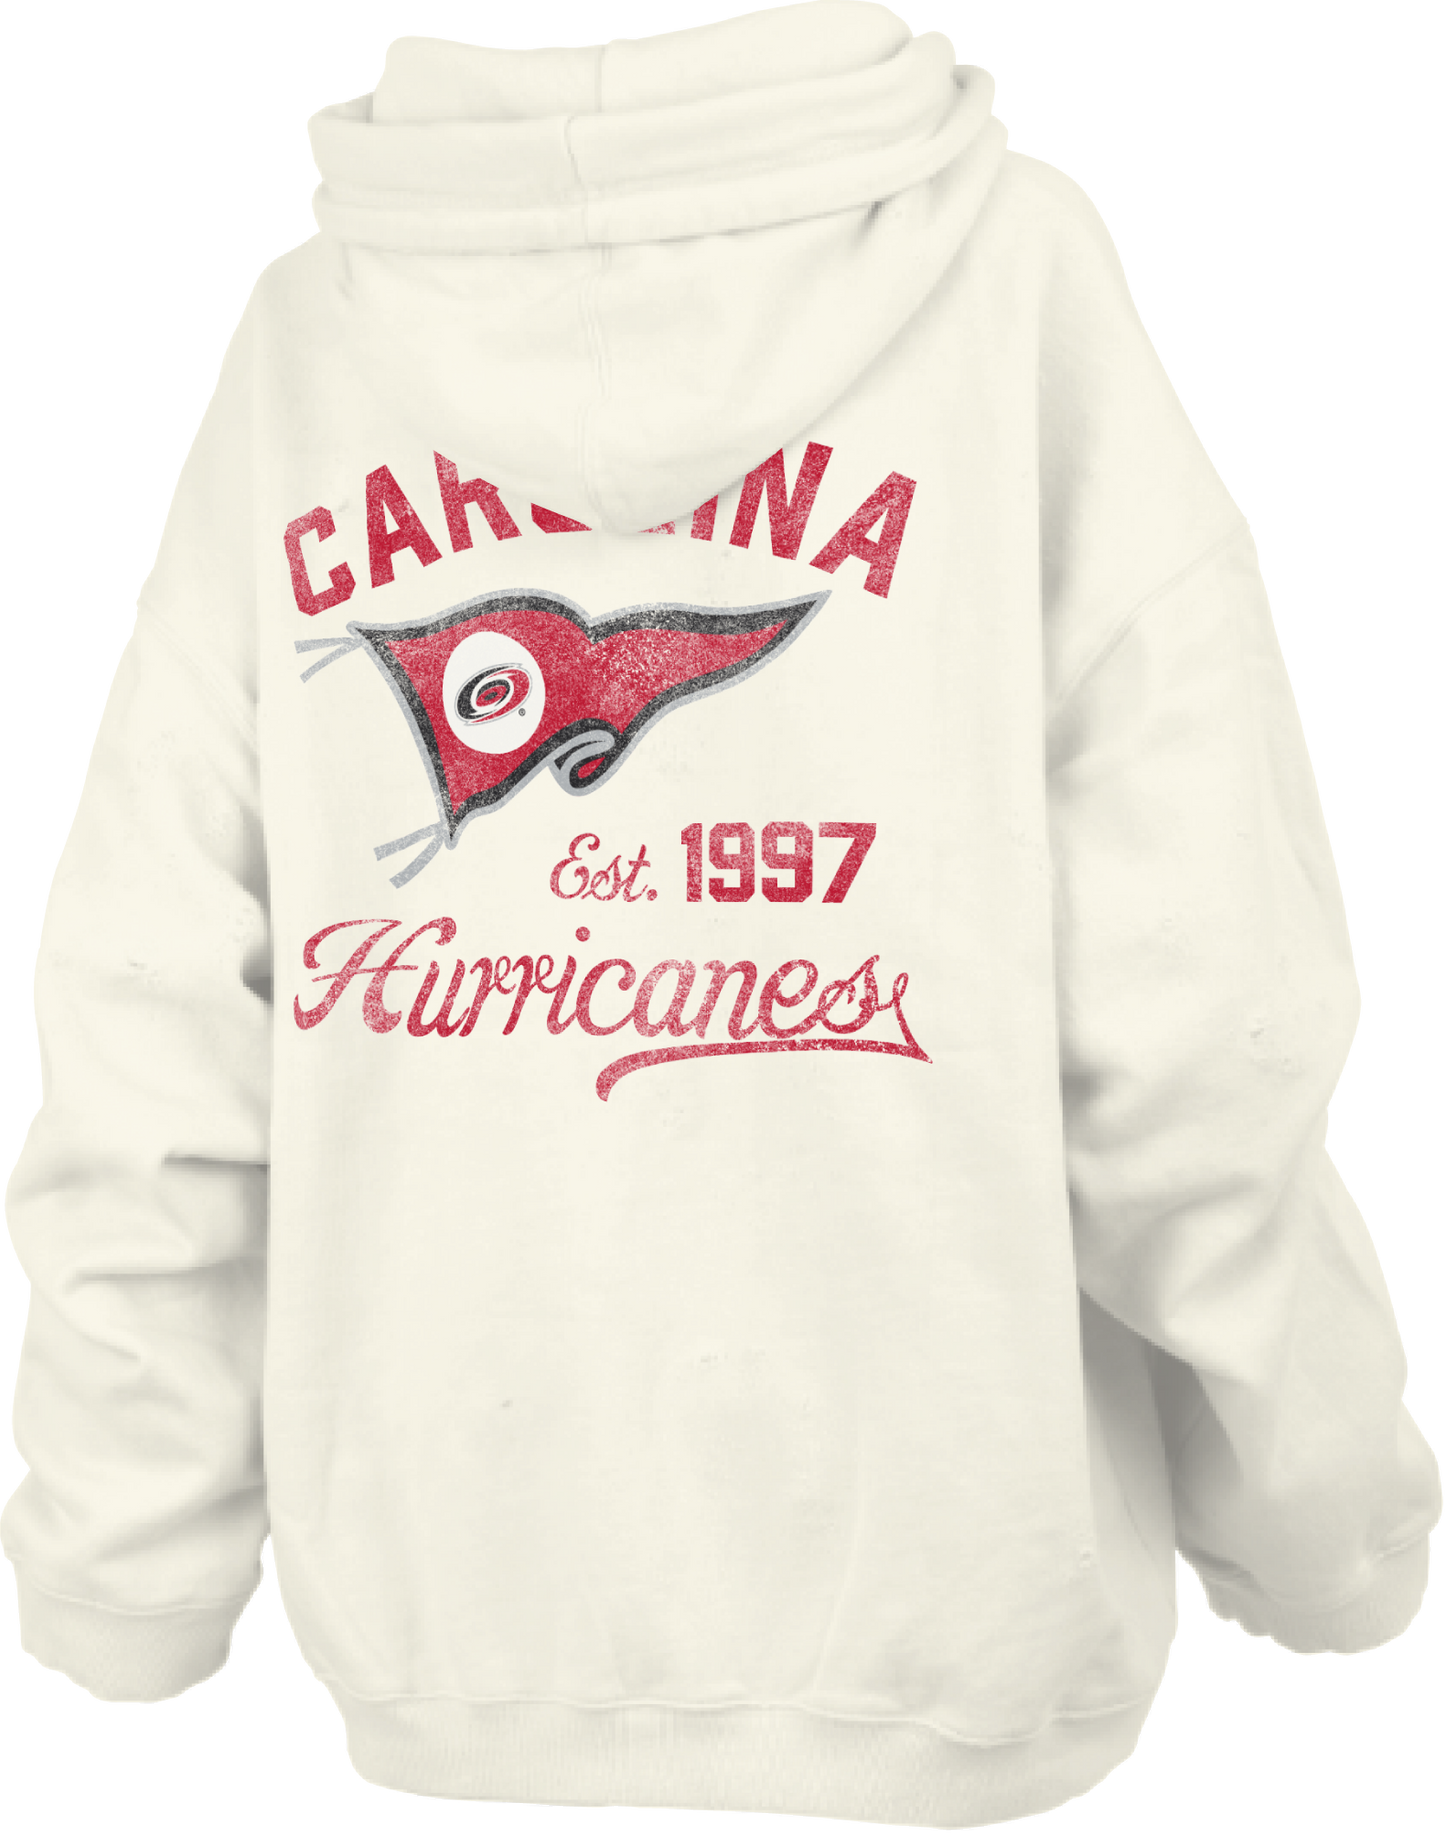 Back: Cream hoodie with Hurricanes pennant logo on back and Carolina Hurricanes Est. 1997 in red